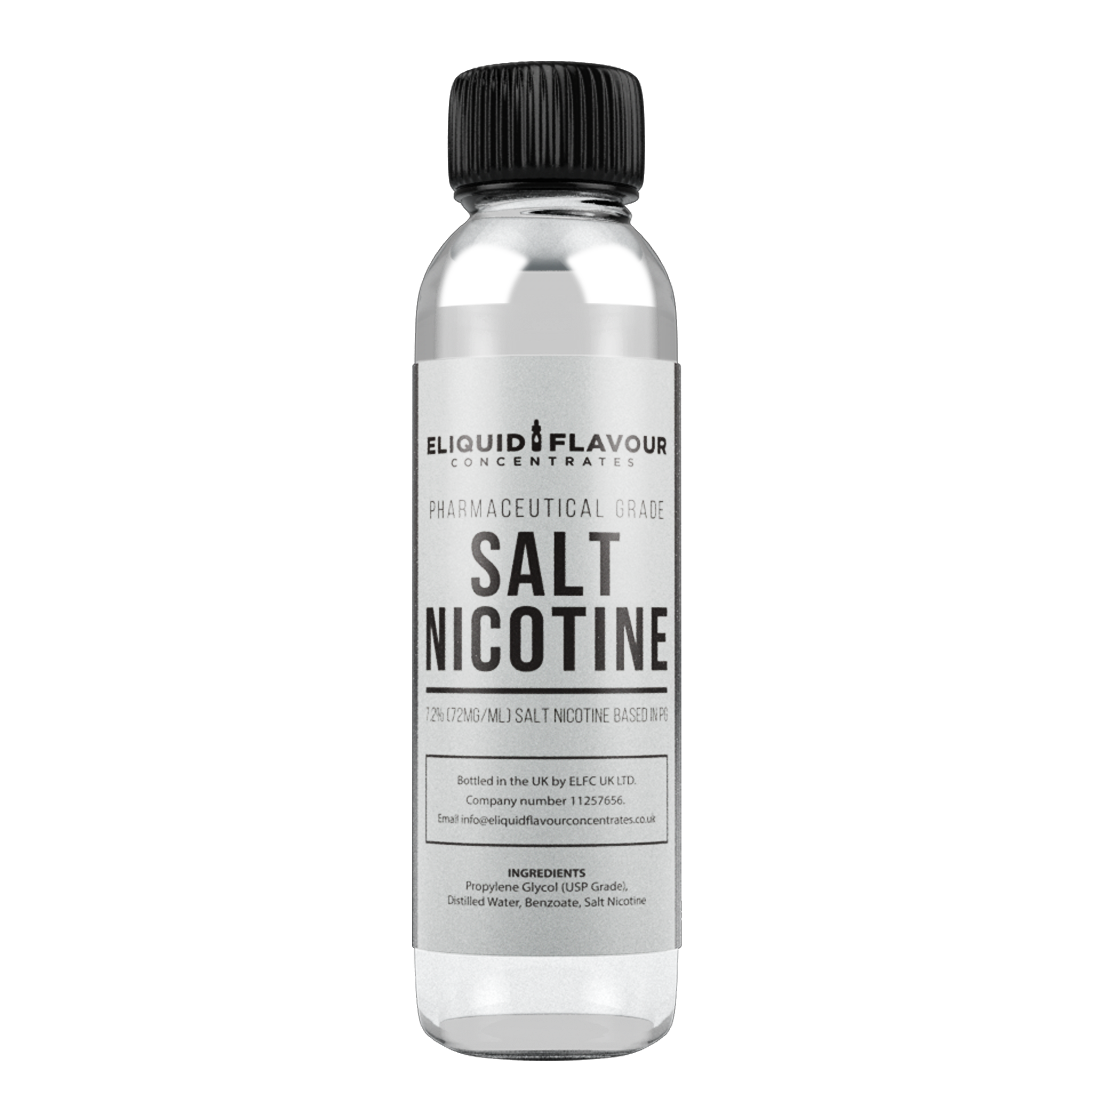 Wholesale 7.2% (72mg/ml) Salt Nicotine Concentrate (PG Based) - TRADE ACCOUNT HOLDERS ONLY